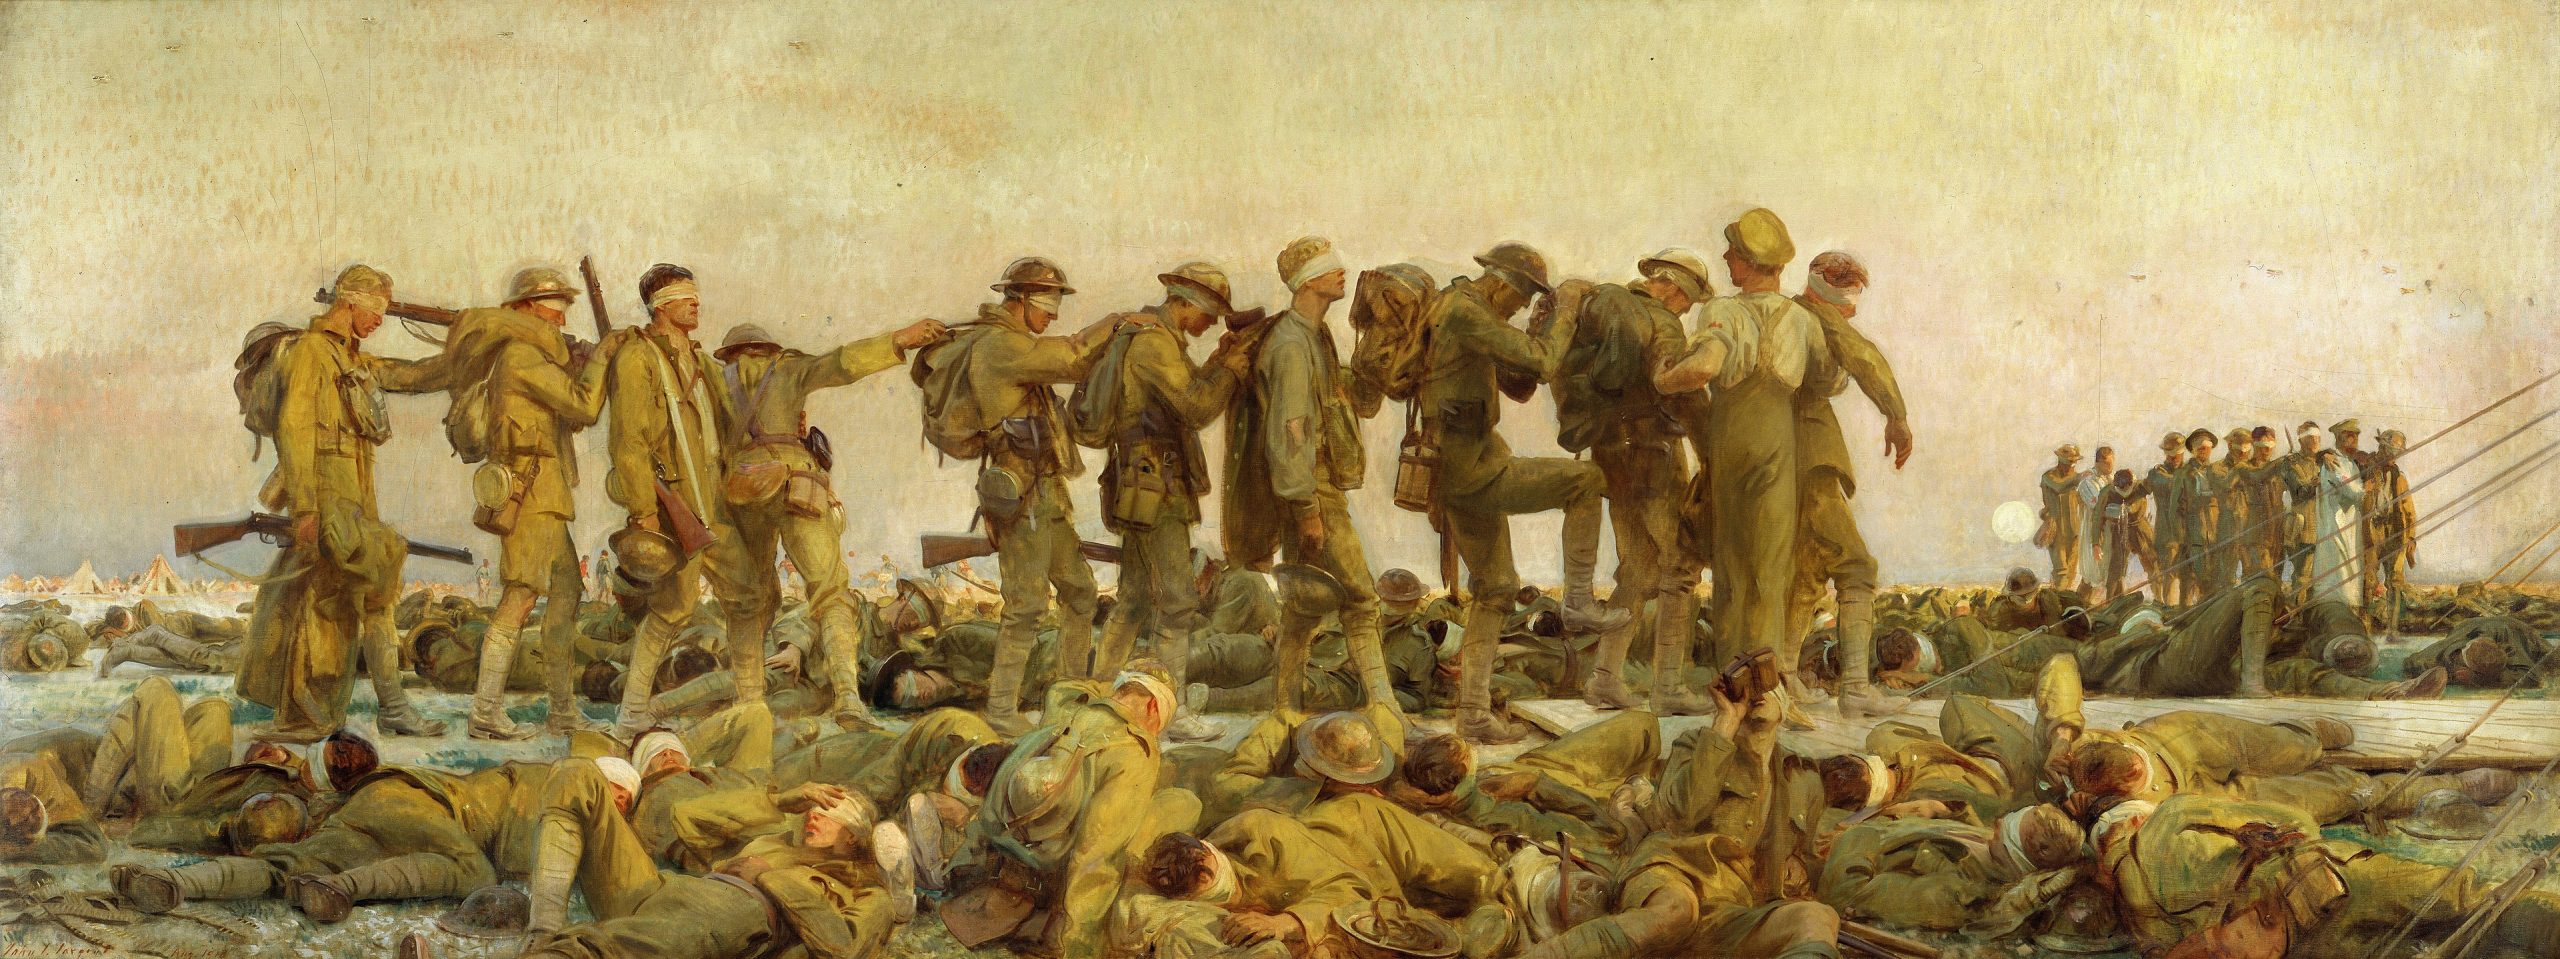 A sideview of a lineup of wounded soldiers trudging along a duckboard while more soldiers lie limp in the foreground and background